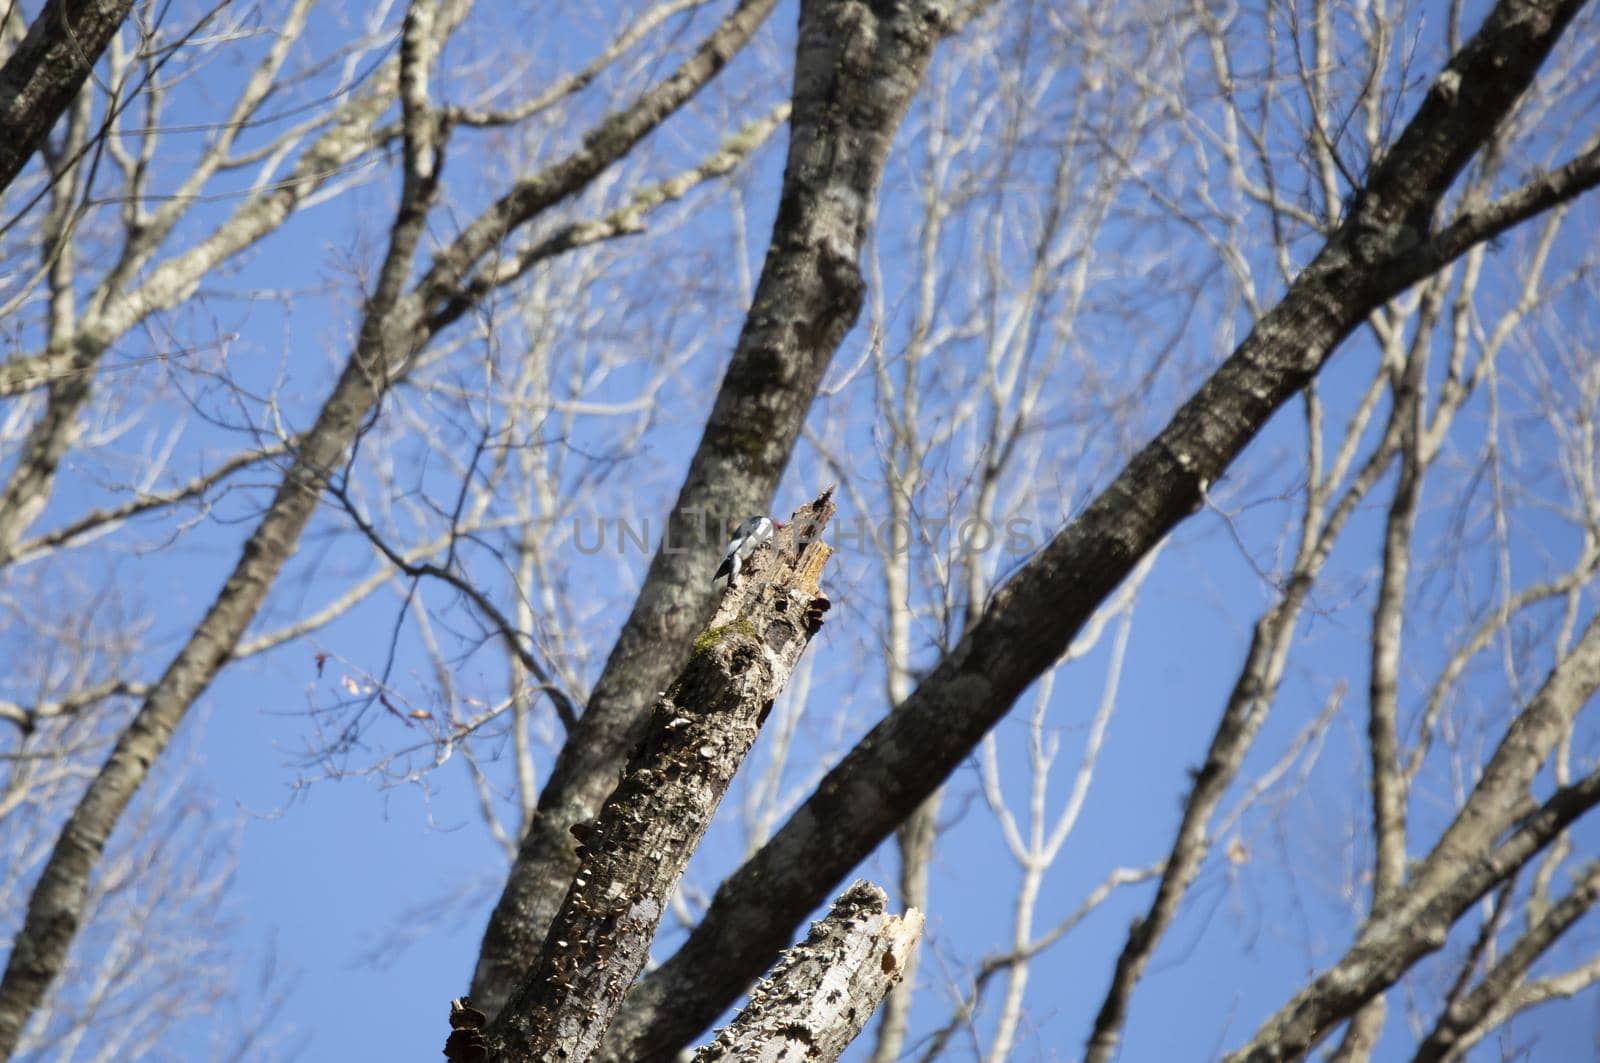 Adult redheaded woodpecker (Melanerpes erythrocephalus) foraging on a dying tree trunk